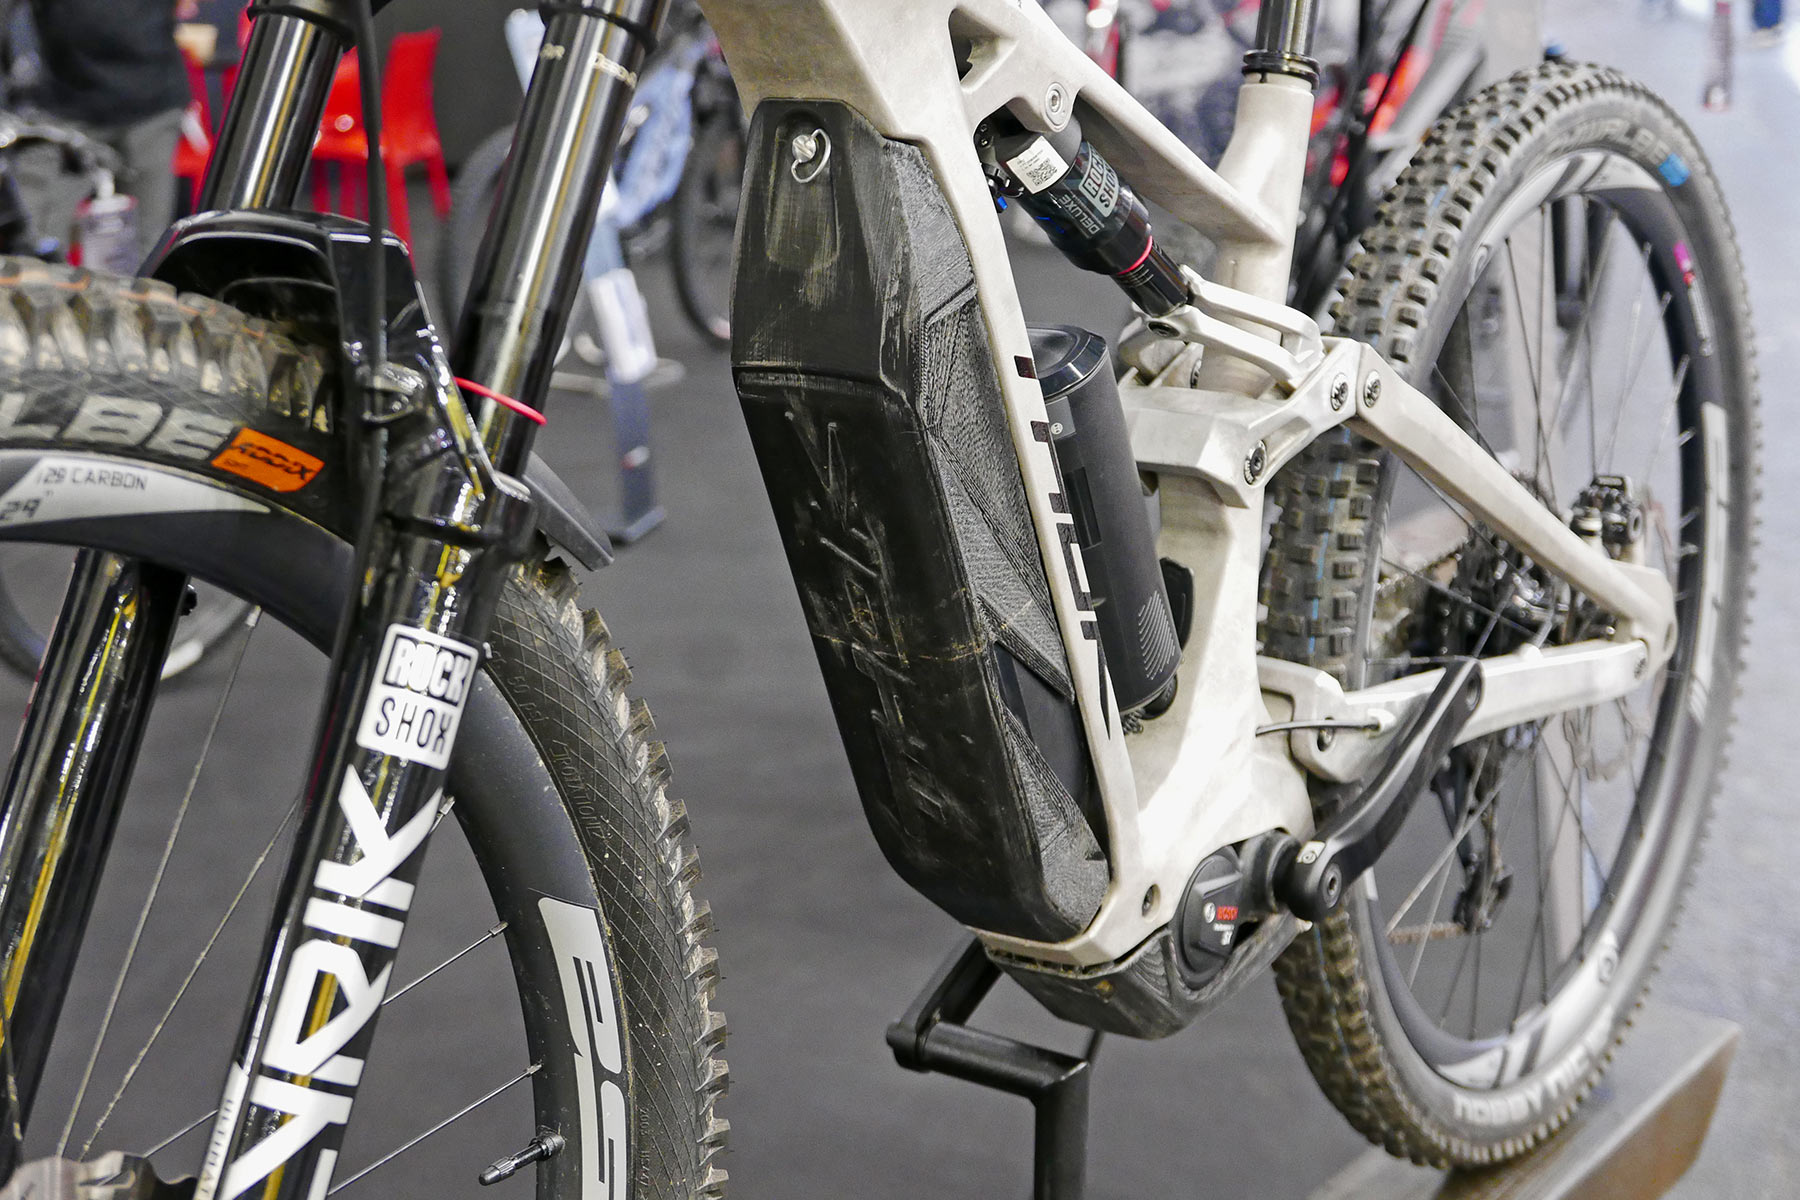 Thok Project 4 eMTB prototype, lightweight 3D-printed alloy all-mountain ebike, downtube battery cover